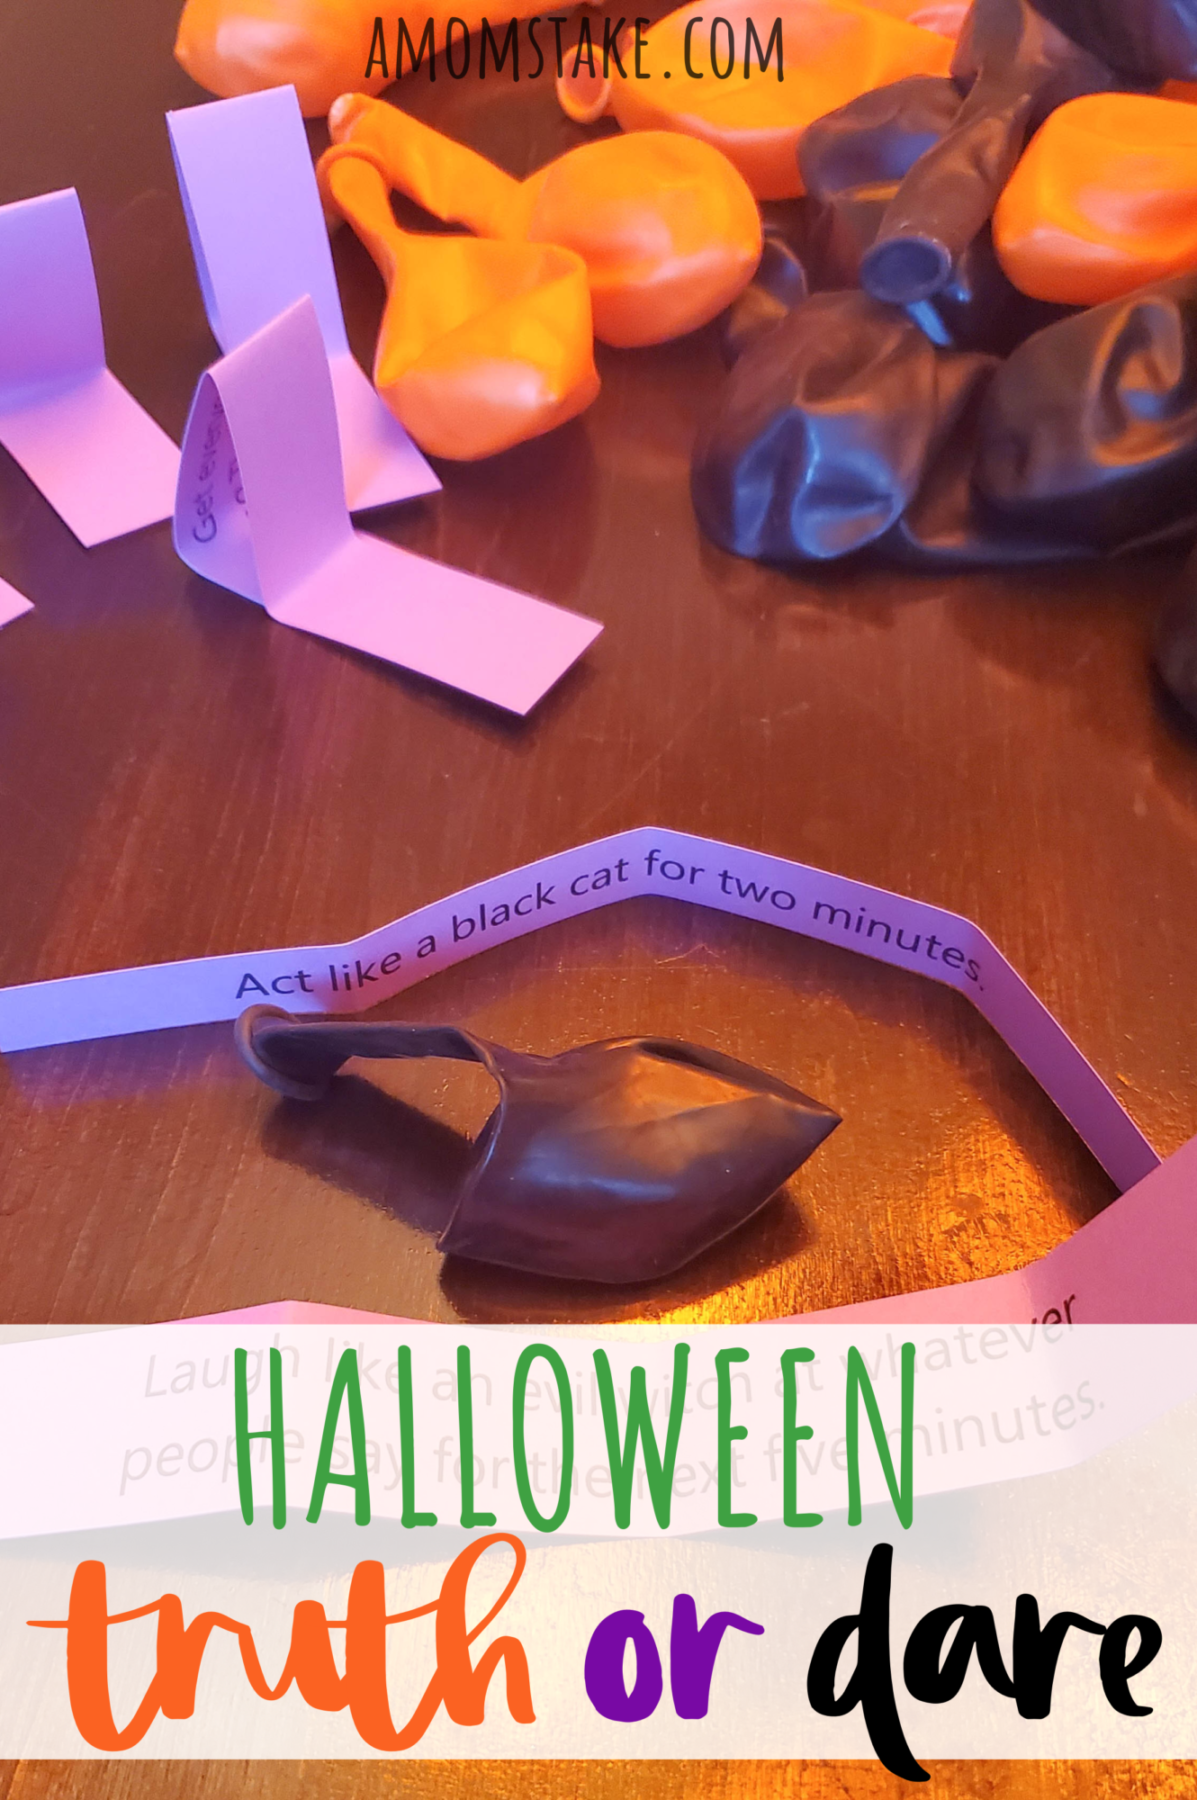 Halloween truth or dare balloon game. See all 21 Halloween Party Game Ideas and party checklist printable. Get inspired by all these fun kid-friendly Halloween Activities and games for a variety of ages. Fun themed Halloween games for the whole family.